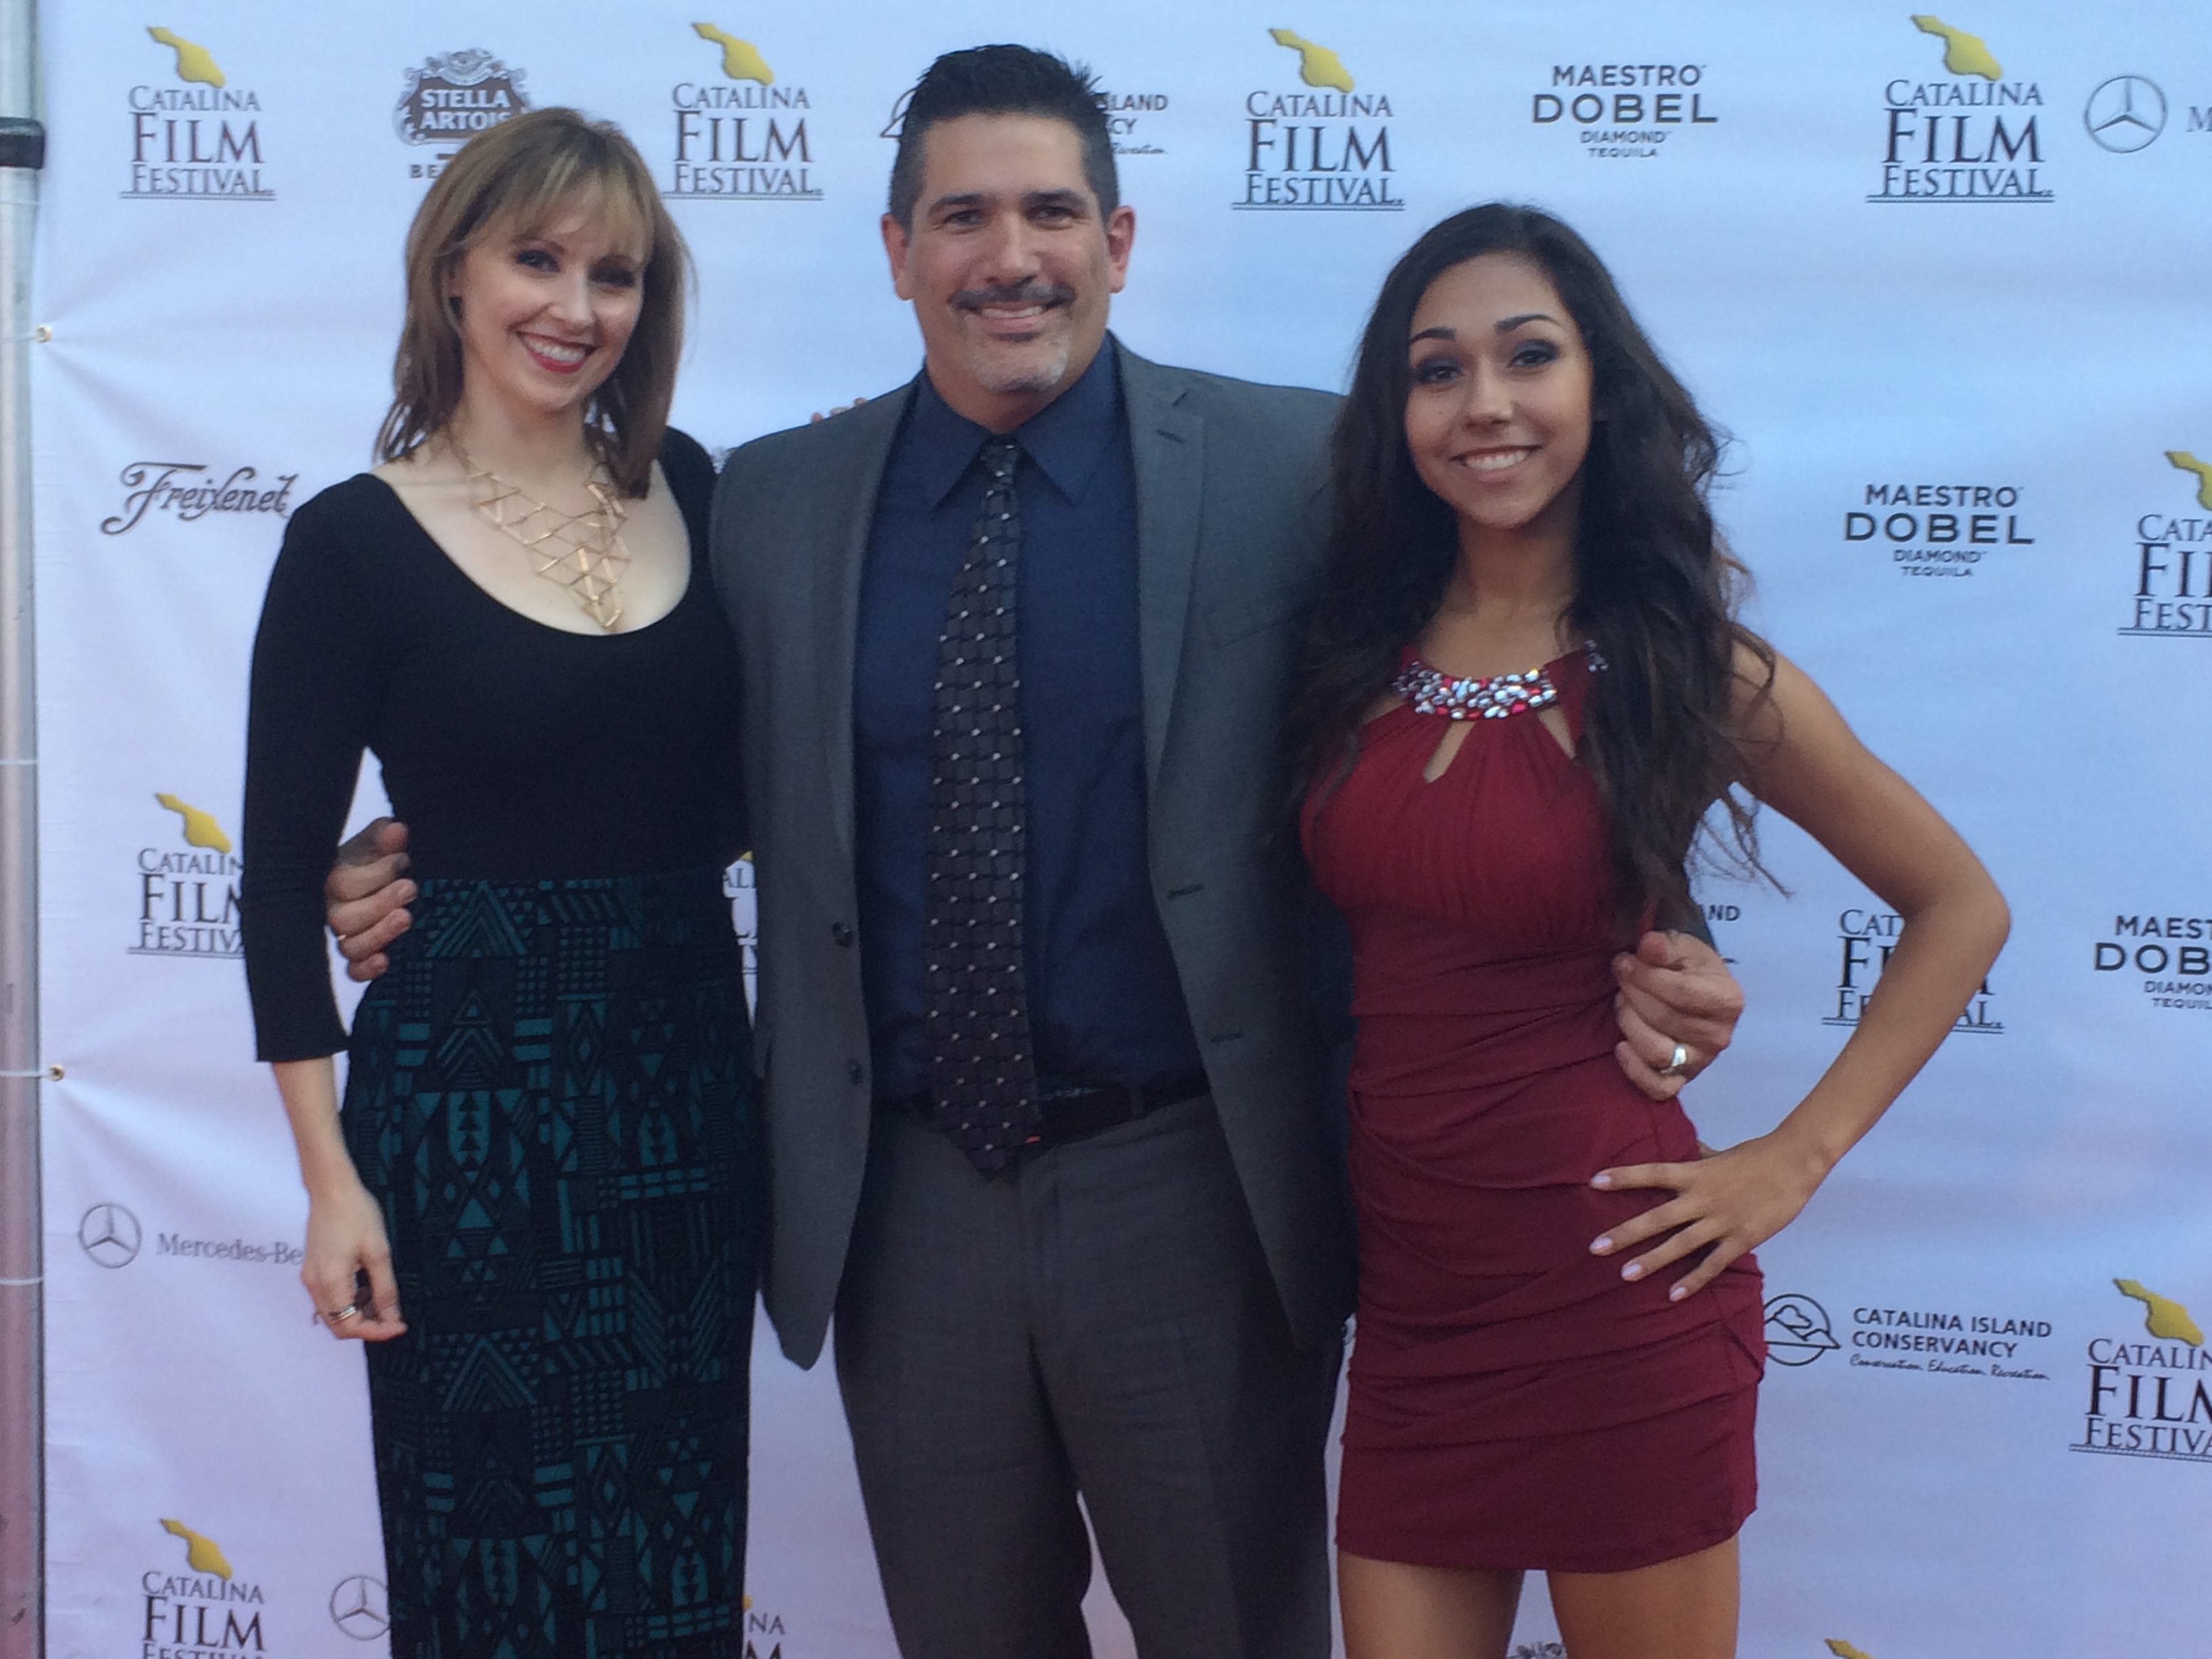 Brooklyn Haley, Elise Angell and Thomas Haley at the CATALINA FILM FESTIVAL for the screening of THIRTEEN.